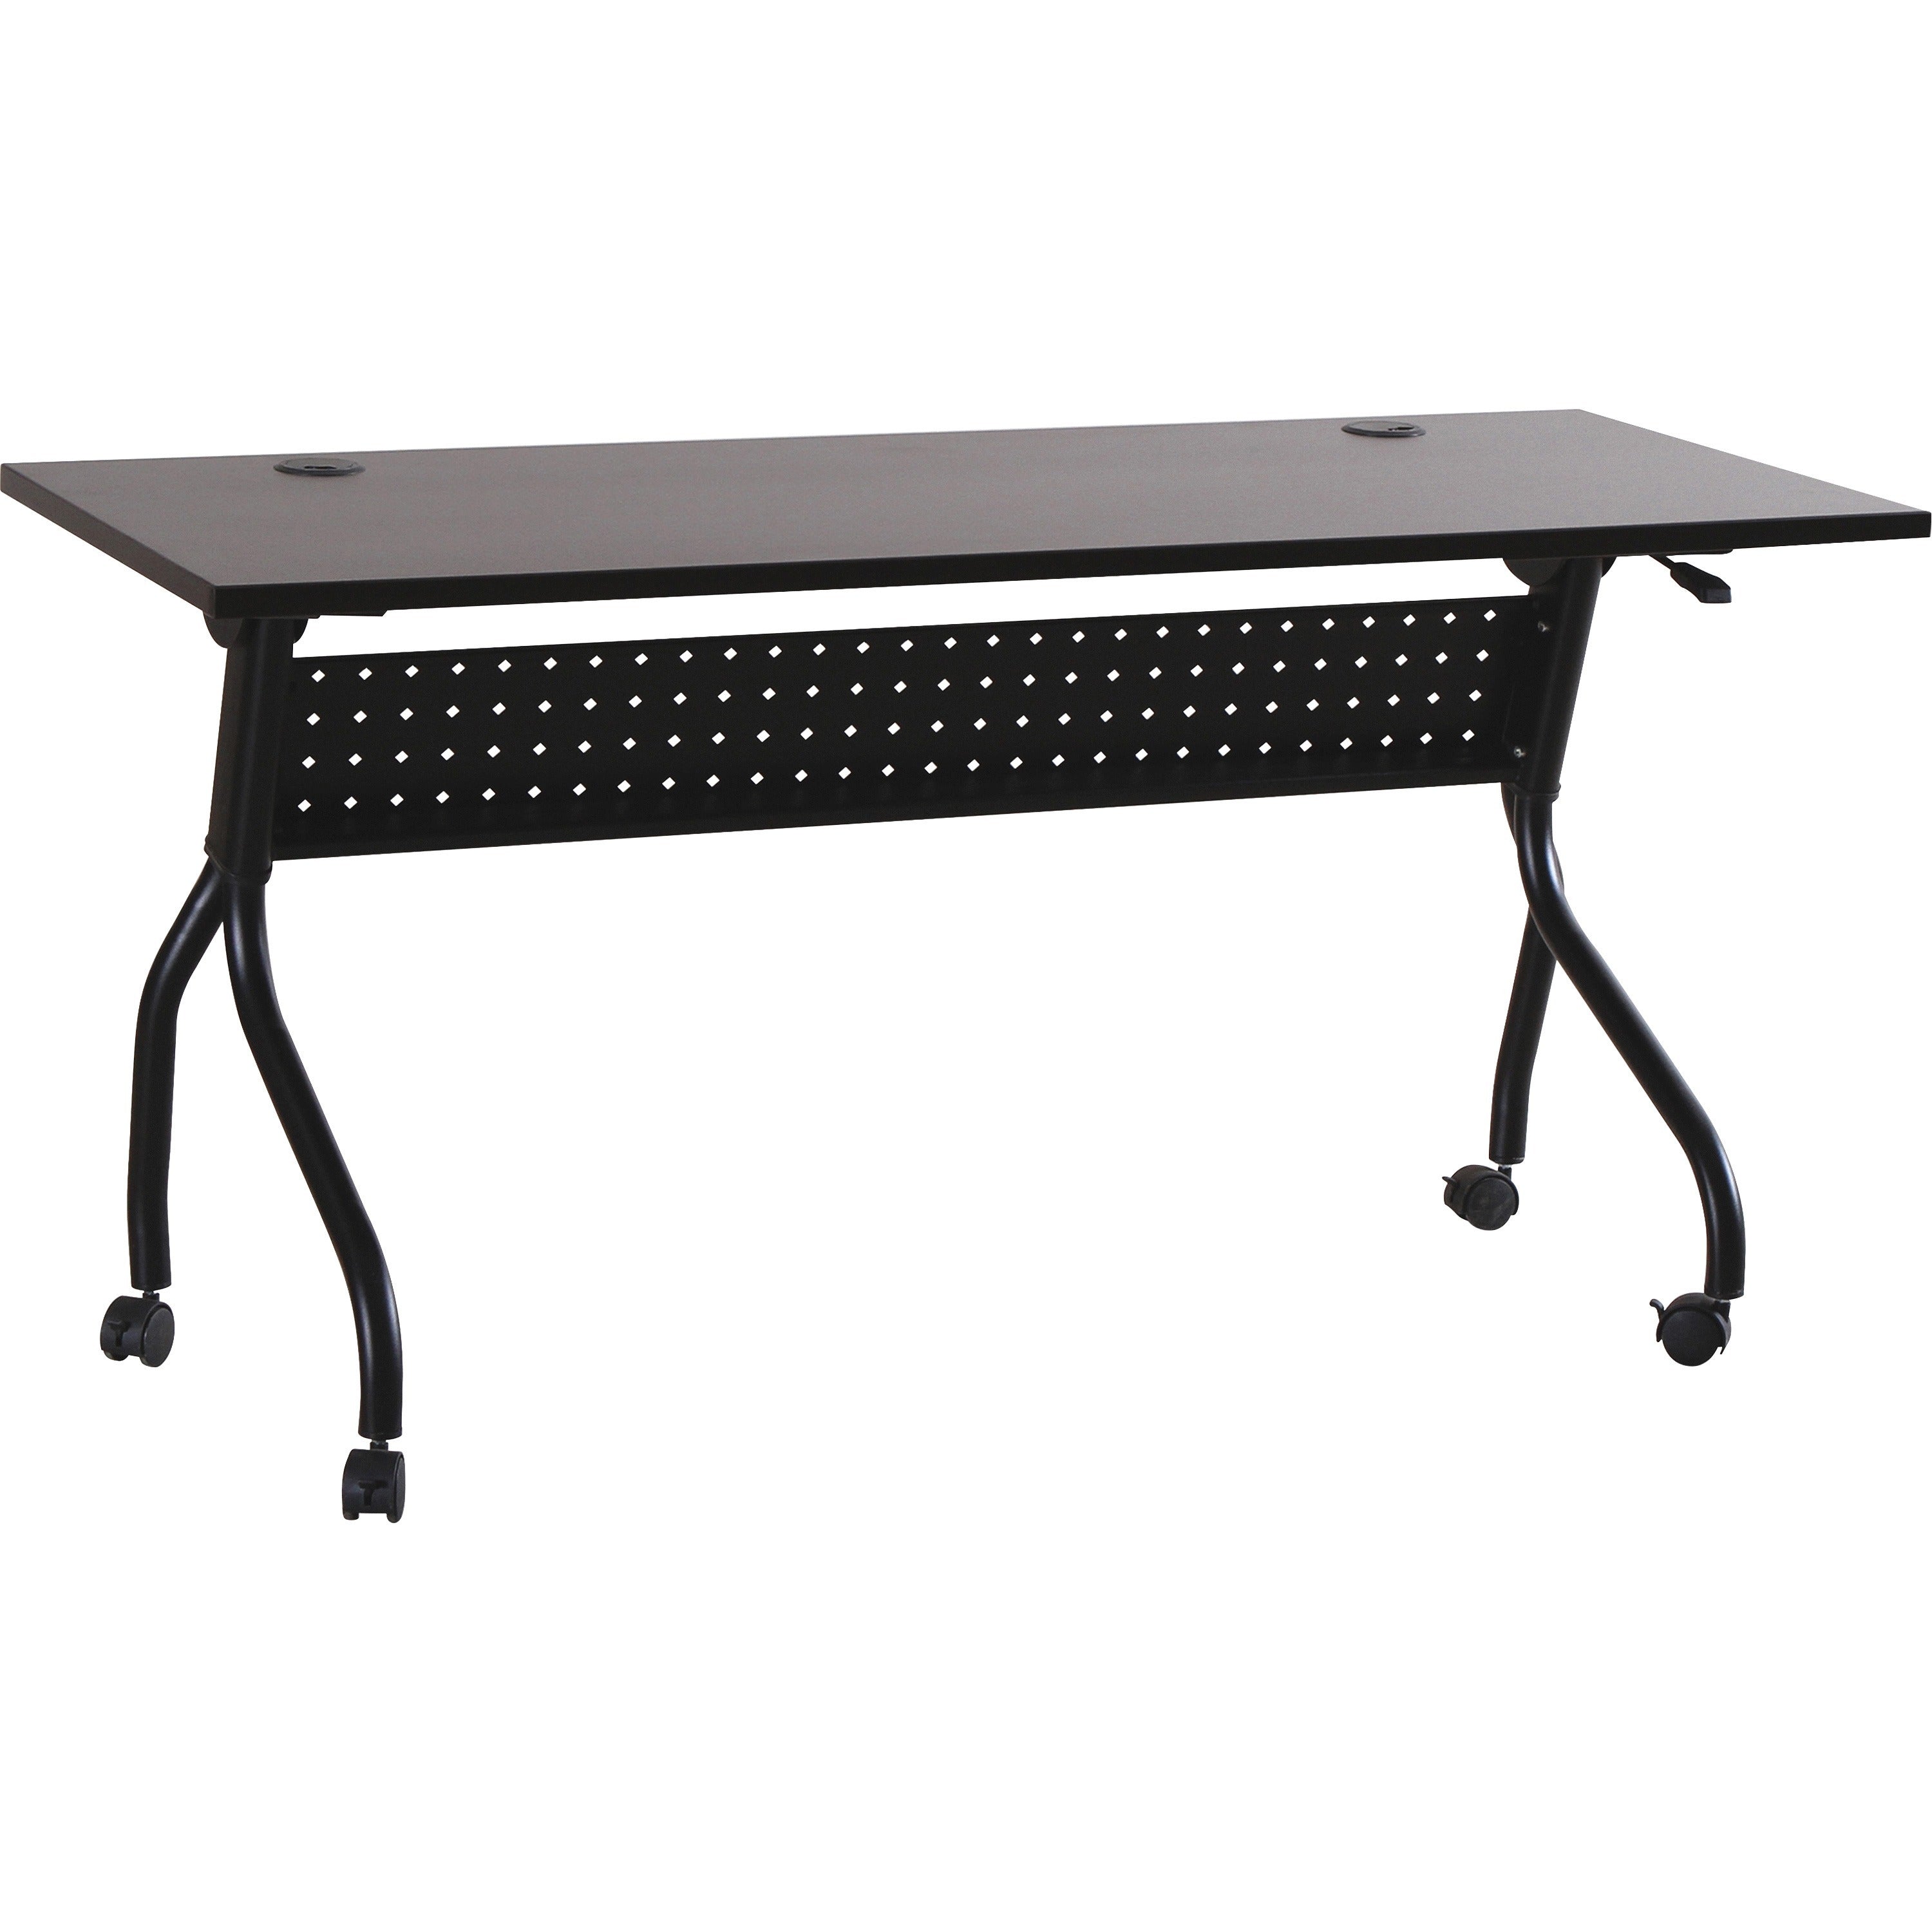 Lorell Flip Top Training Table - For - Table TopRectangle Top - Four Leg Base - 4 Legs x 48" Table Top Width x 23.50" Table Top Depth - 29.50" Height x 47.25" Width x 23.63" Depth - Assembly Required - Black, Espresso - Melamine, Nylon - 1 Each - 